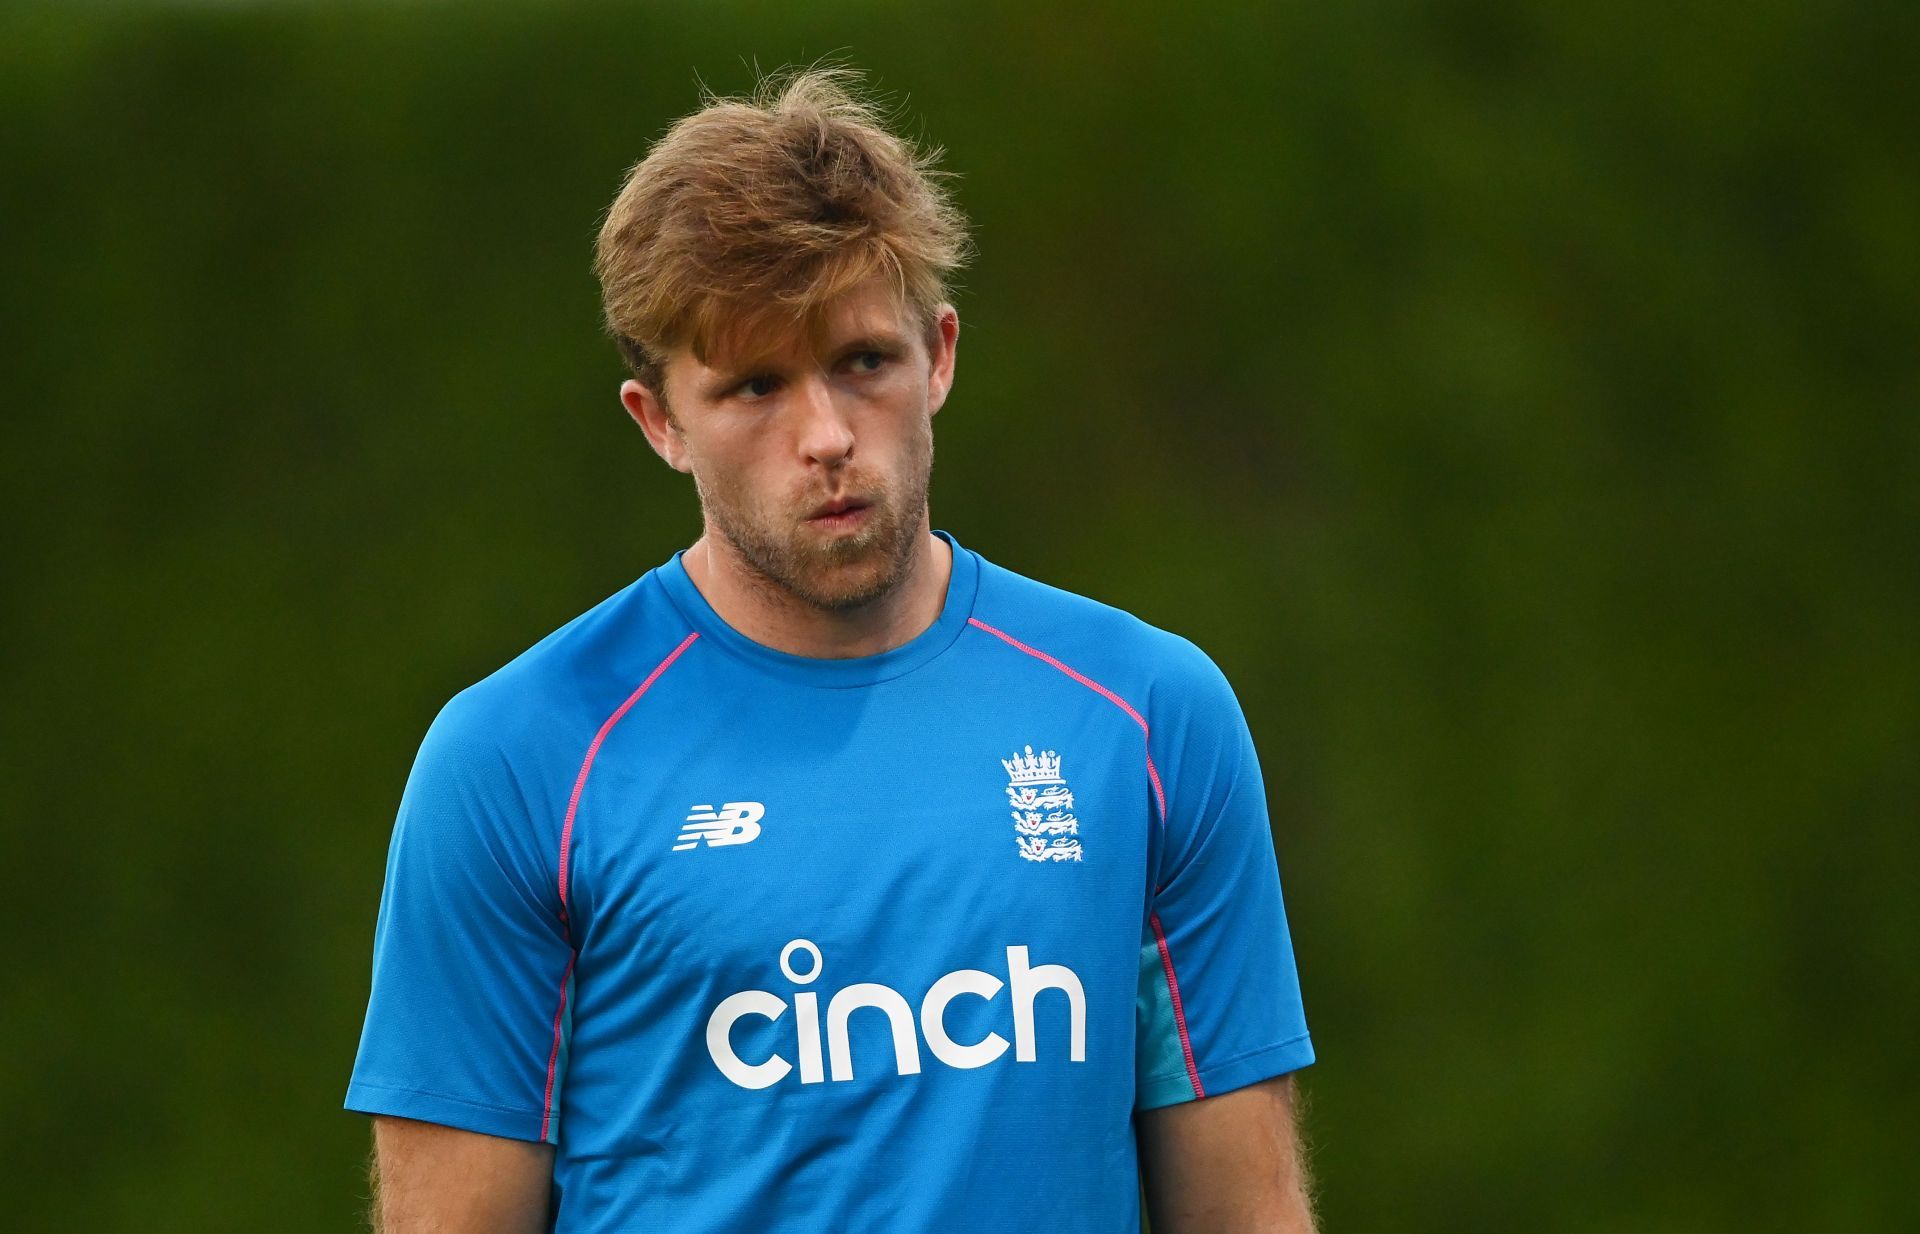 David Willey will be in action for Yorkshire in Match 50 of the T20 Blast